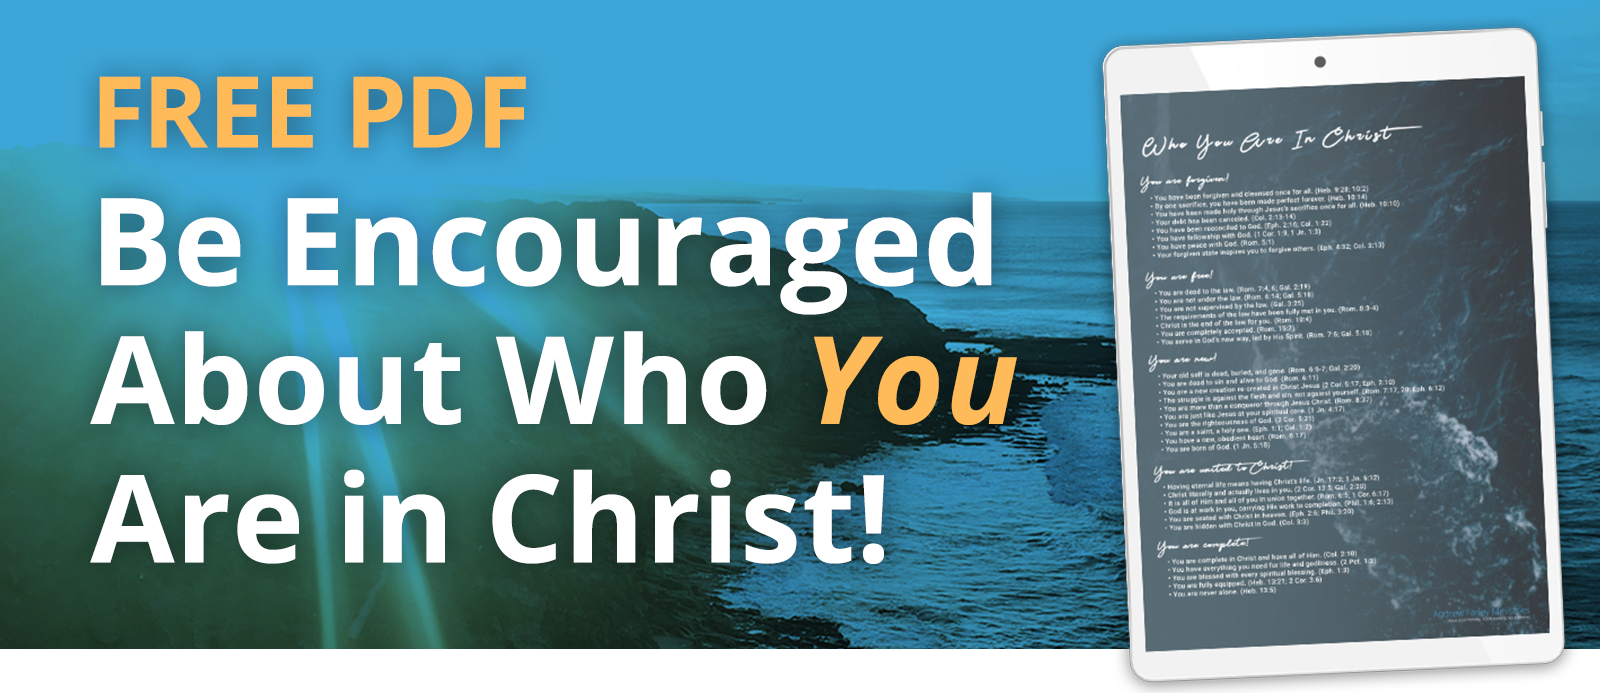 FREE PDF Be Encouraged About Who You Are in Christ!